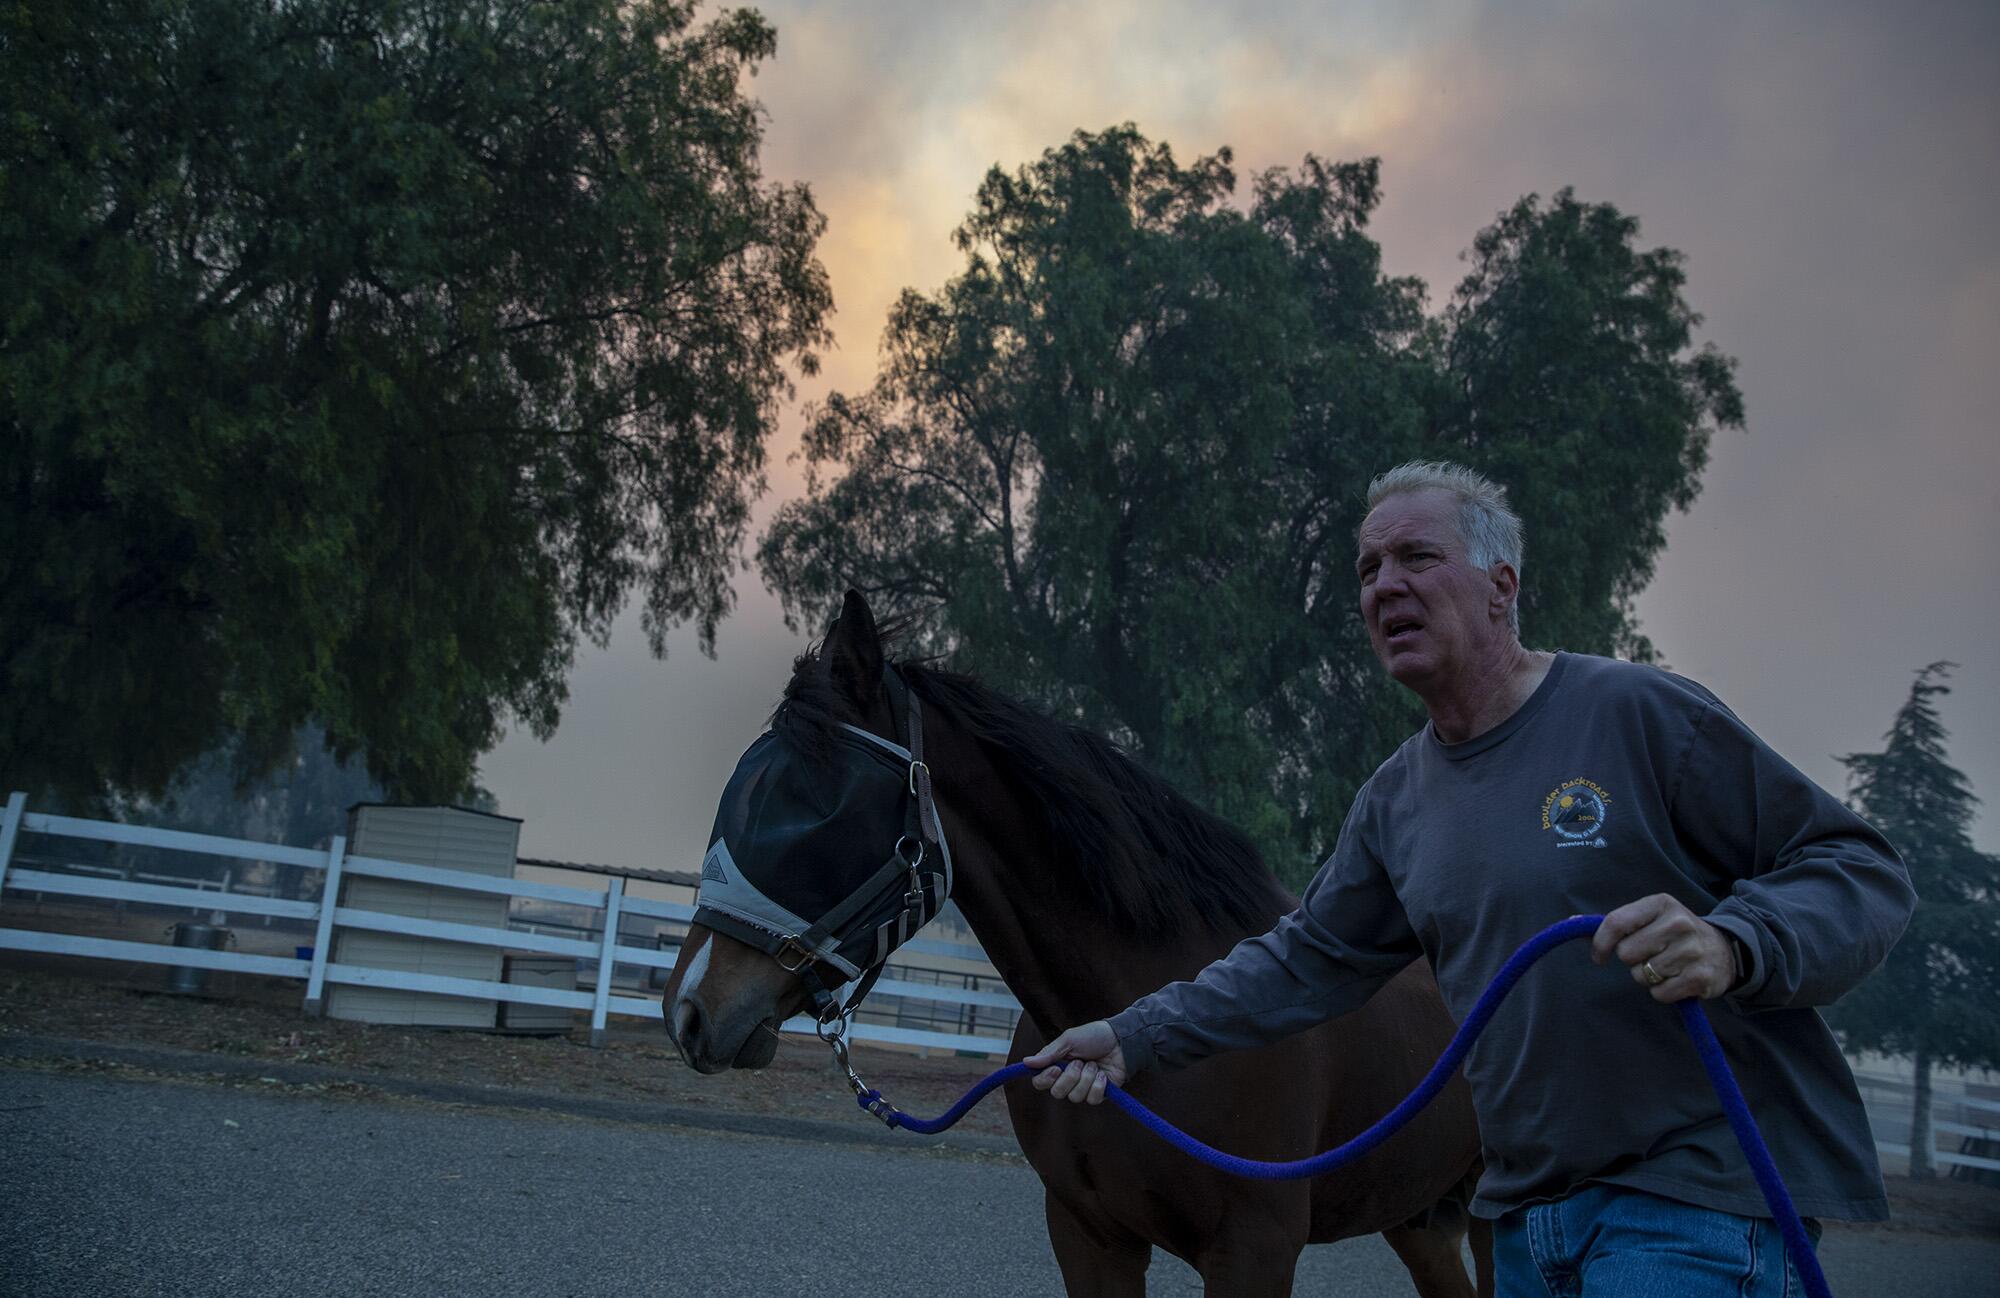 A man flees with a horse as they evacuate Castle Rock Farms while firefighters battle the Easy fire in Simi Valley in 2019.